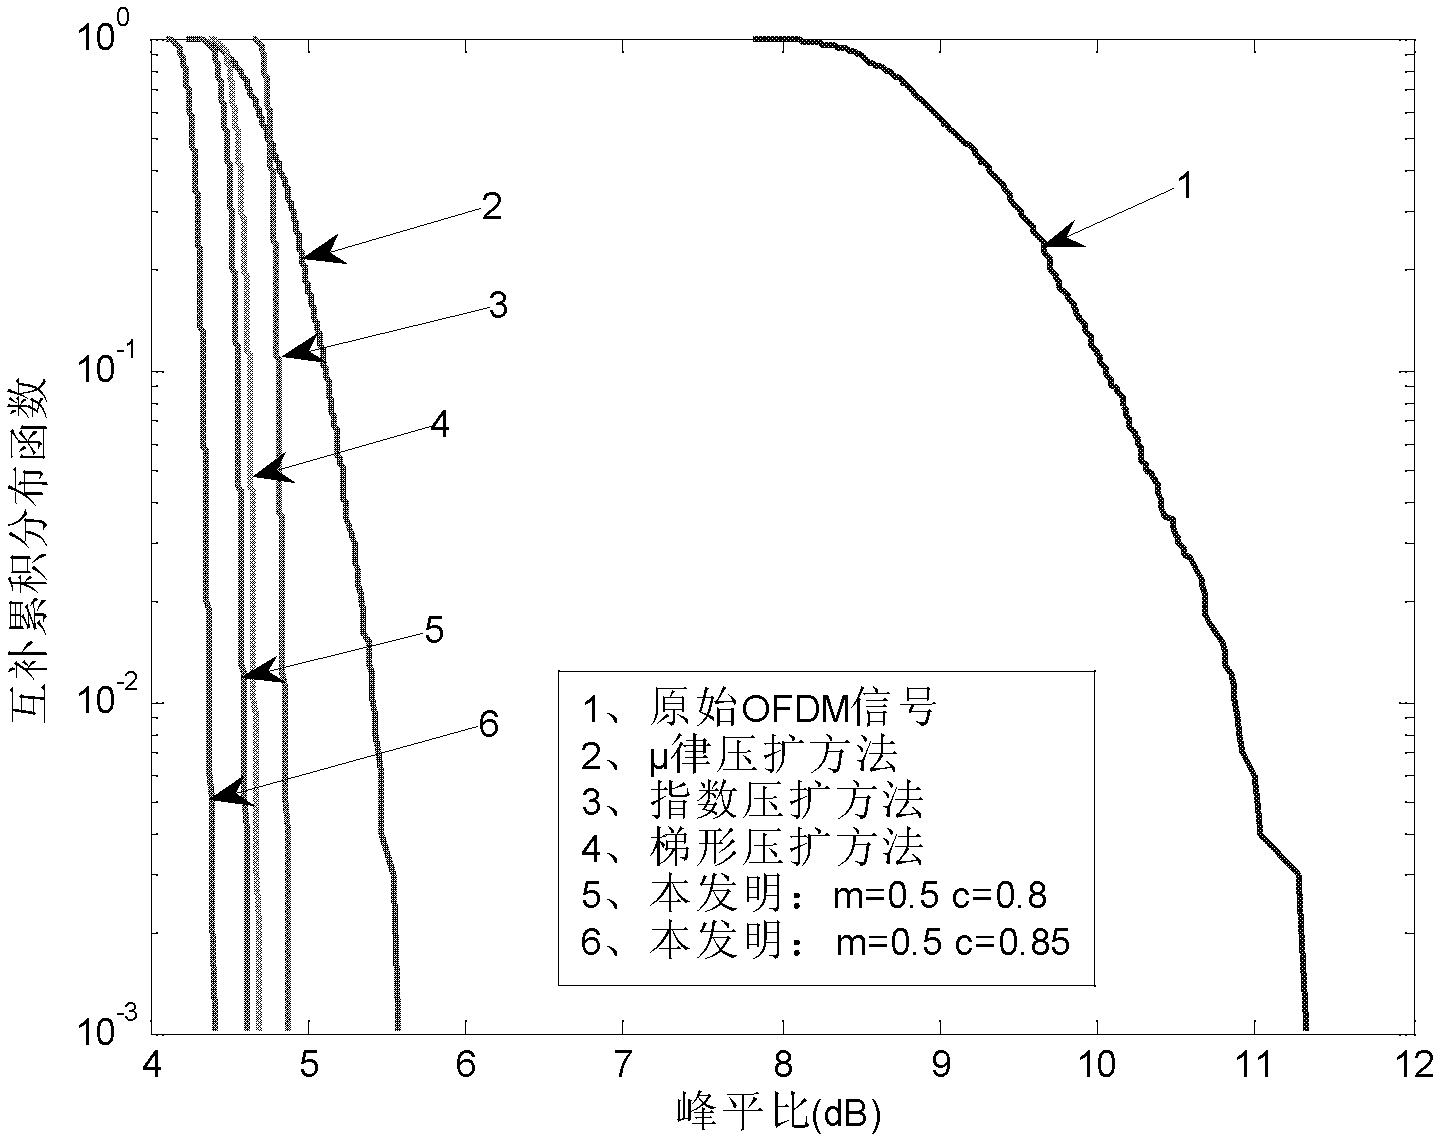 Method for suppressing peak-to-average power ratio of wireless OFDM (Orthogonal Frequency Division Multiplexing) signal based on segmented distribution optimization